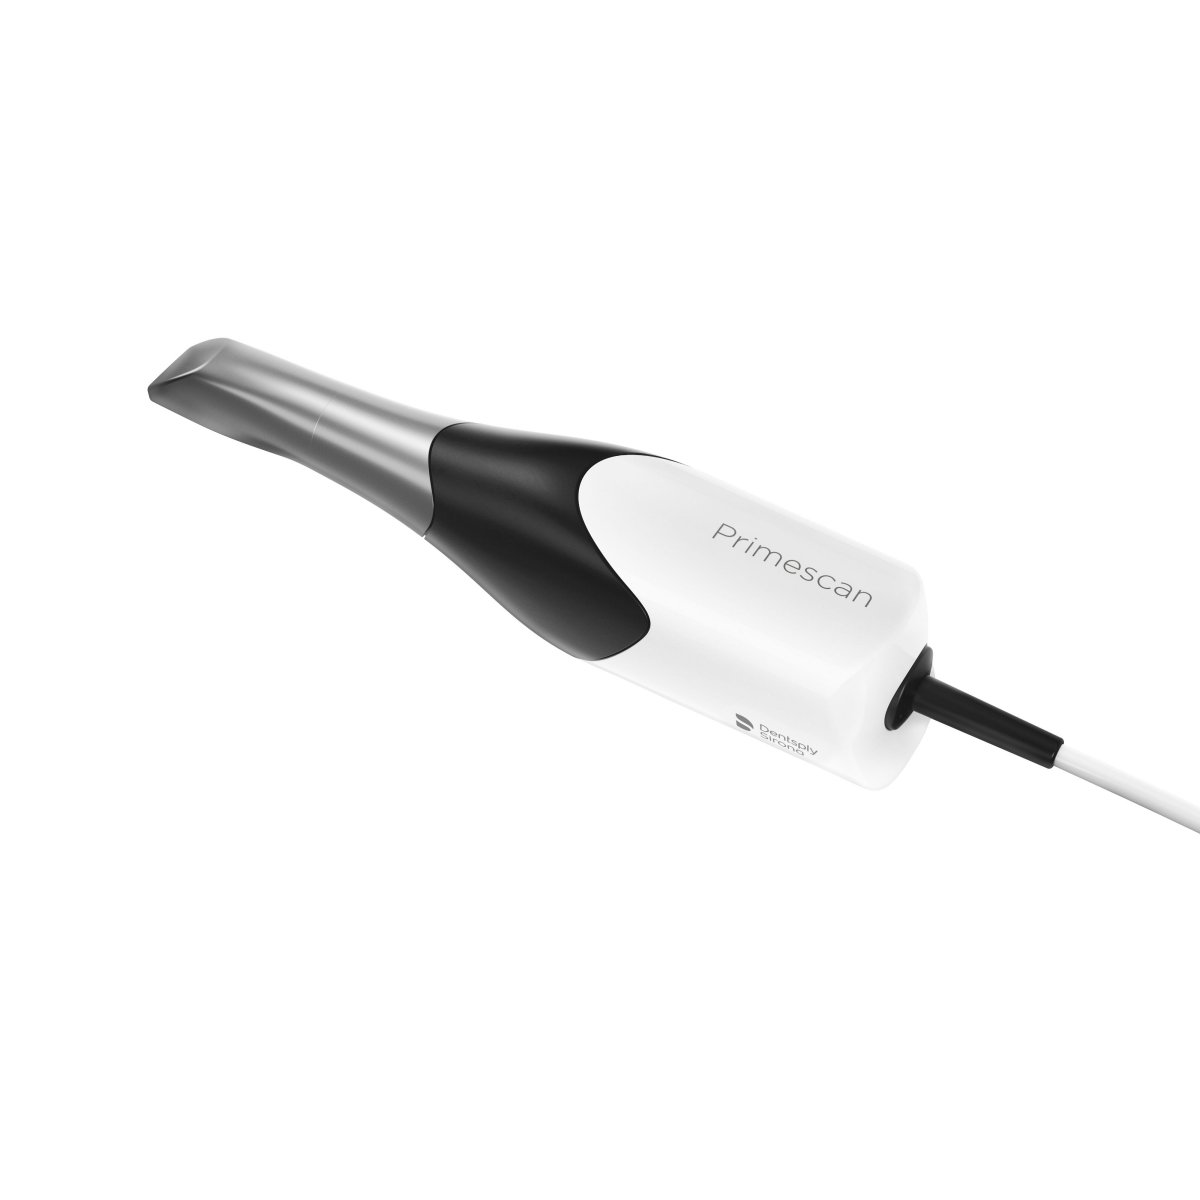 New intraoral scanner from Dentsply Sirona